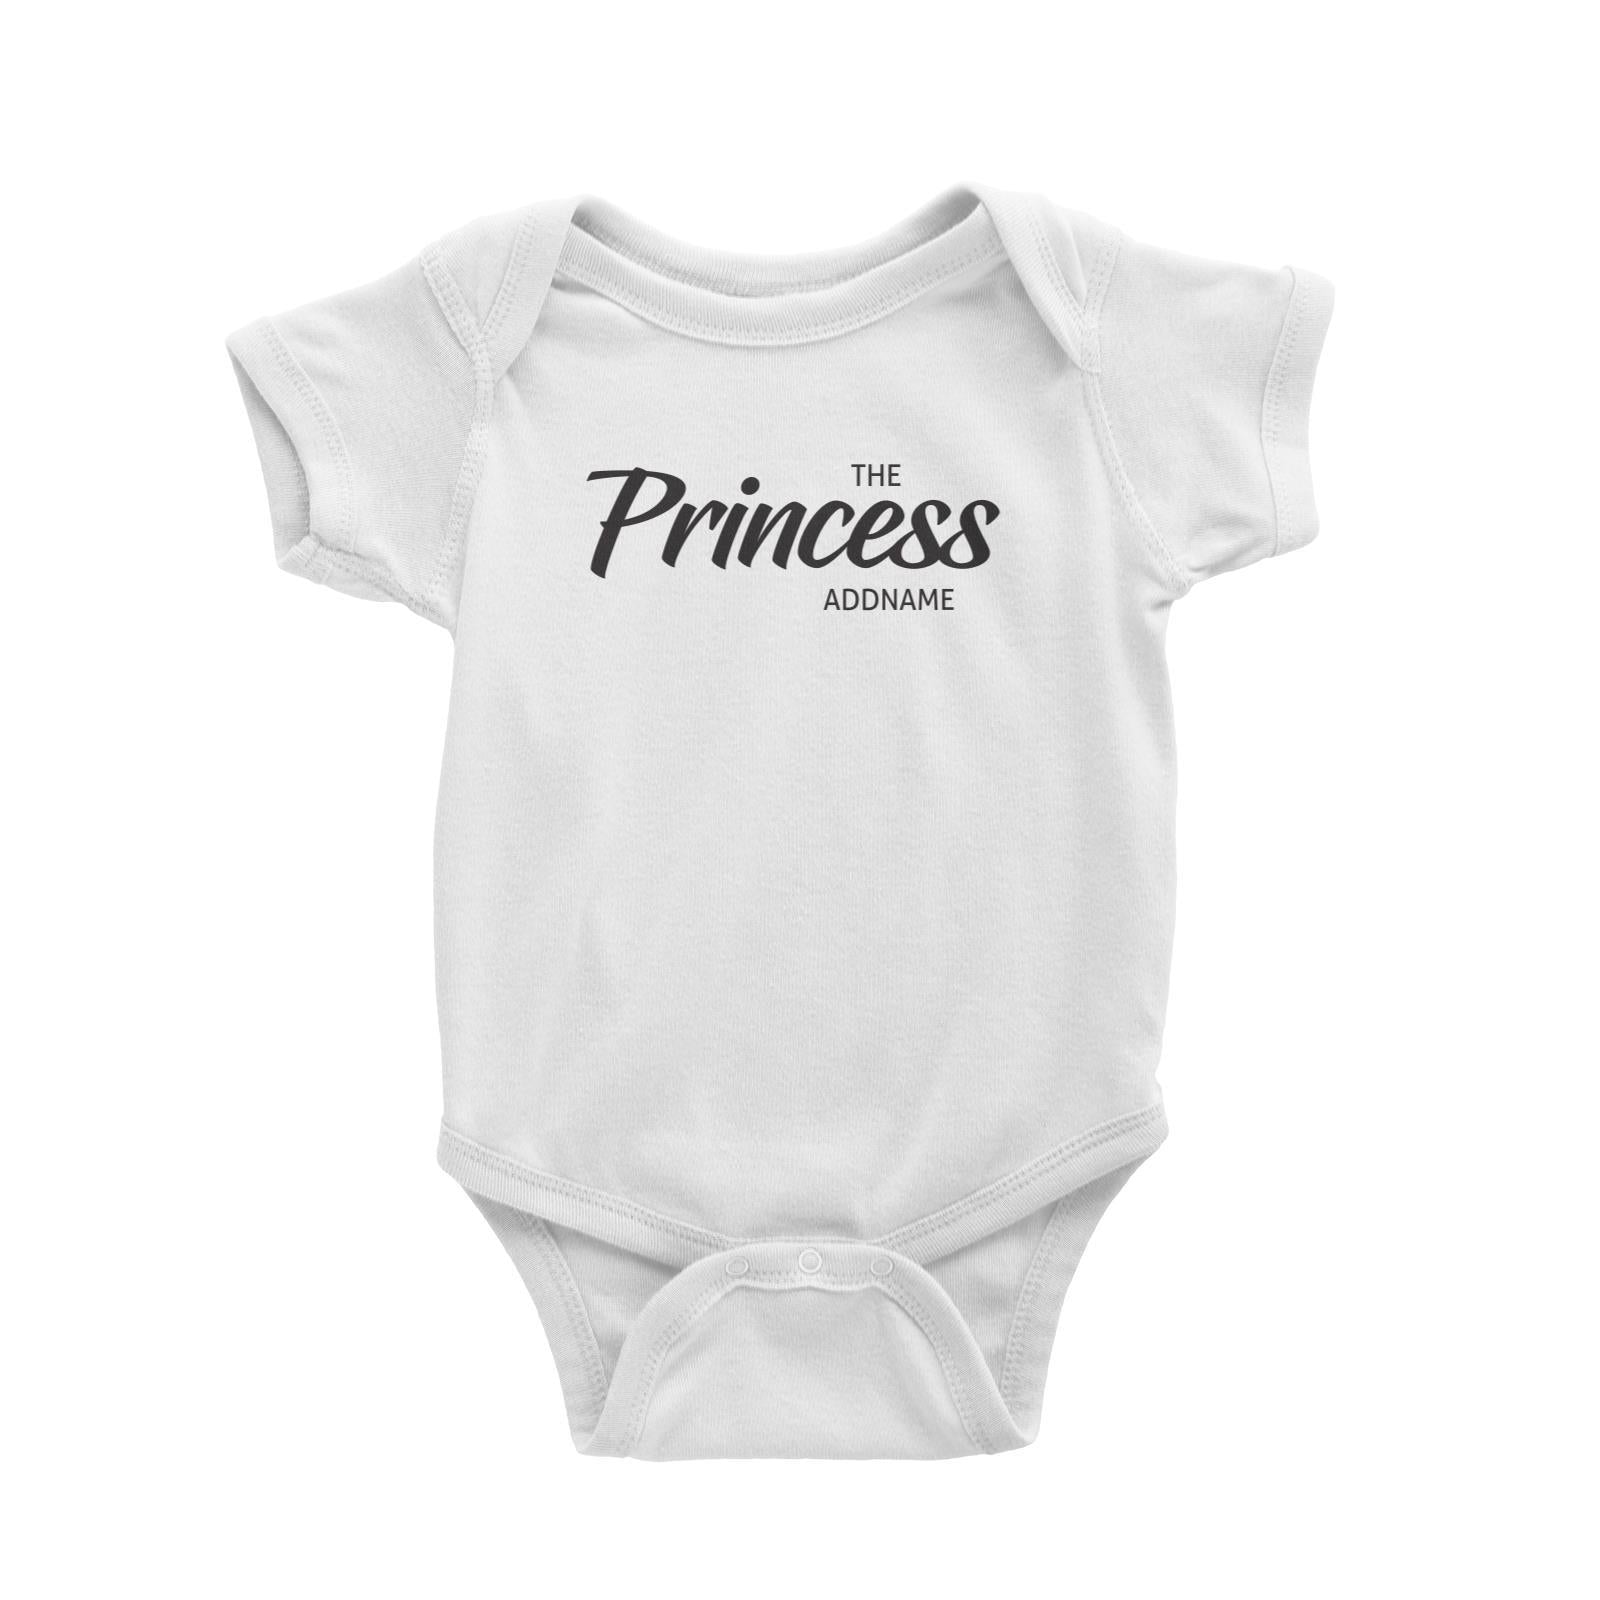 The Princess Addname Baby Romper Personalizable Designs Matching Family Royal Family Edition Royal Simple